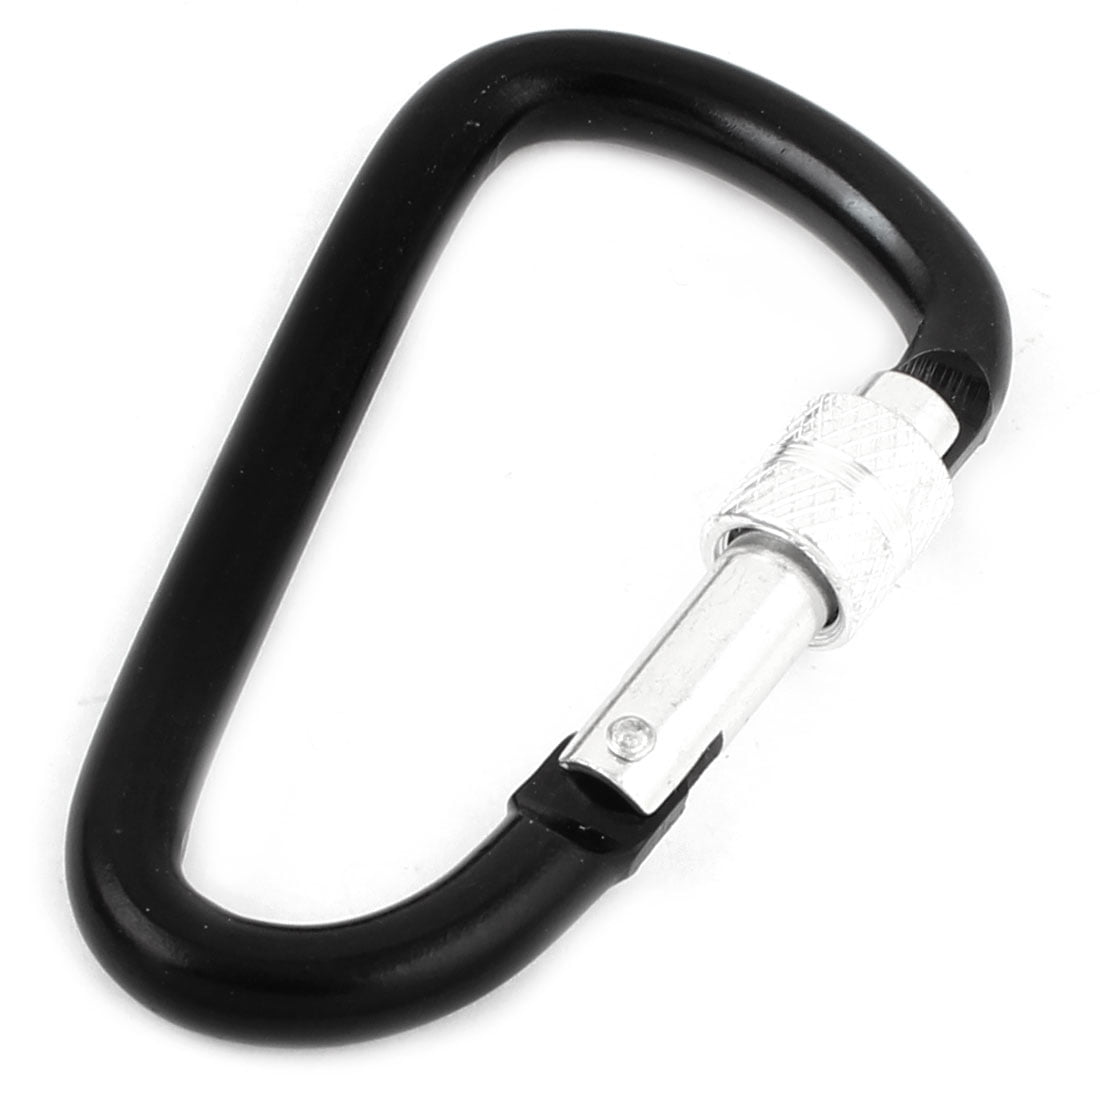 Outdoor Sports Screw Lock Clip Hook Carabiner Lots For Camping Backpack Tents 